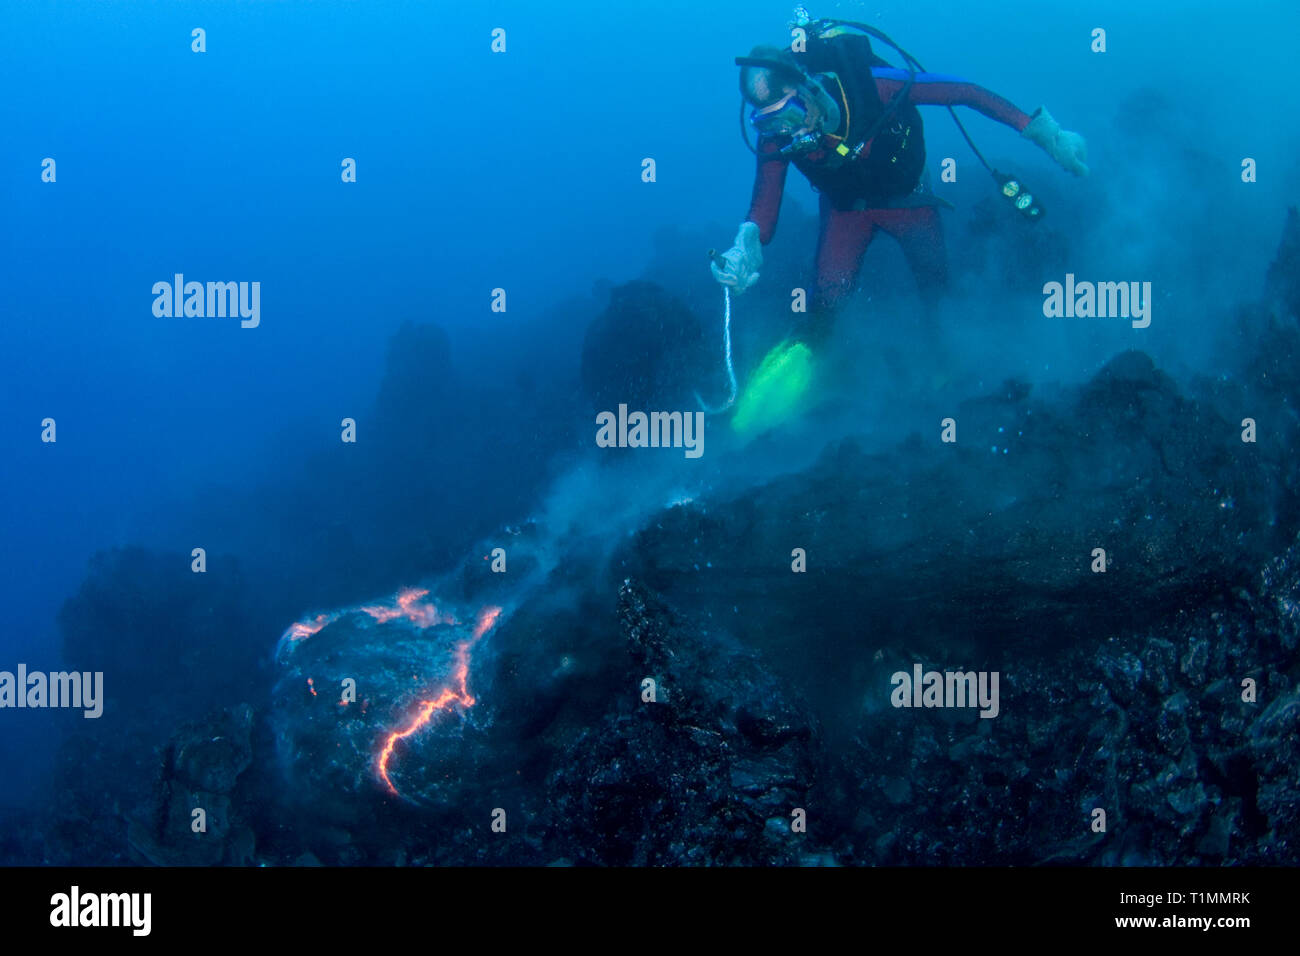 diver Bud Turpin and erupting pillow lava at ocean entry of Kilauea Volcano Hawaii Island ( the Big Island ) Hawaii U.S.A. ( Central Pacific Ocean ) Stock Photo